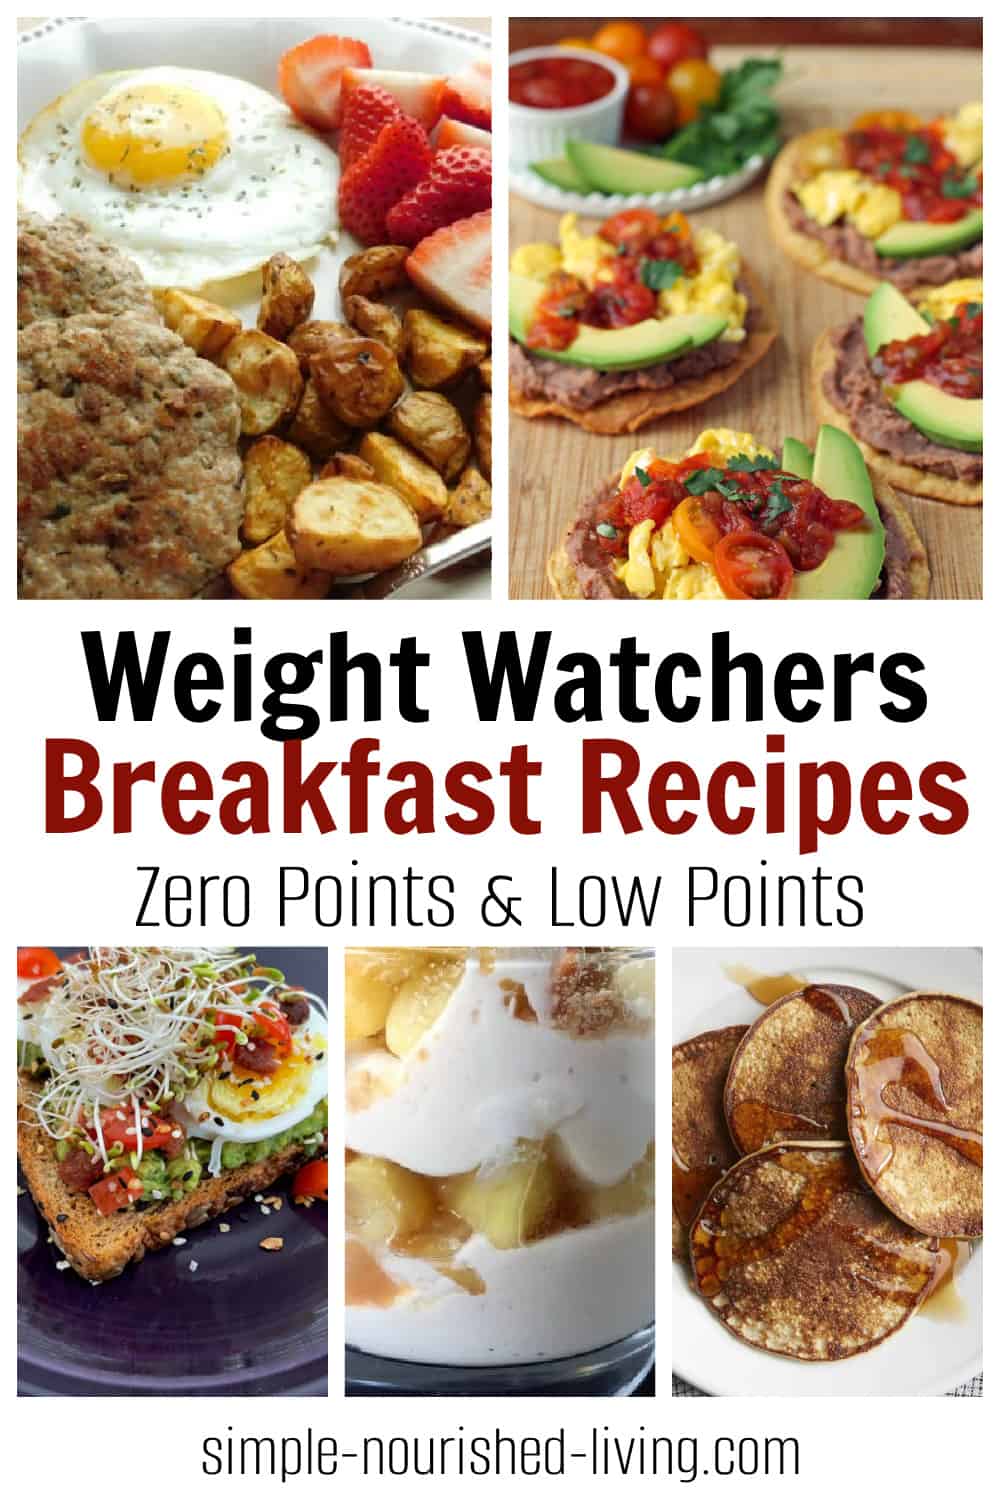 Collage of Food Photos with Text "Weight Watchers Breakfast Recipes Zero Points & Low Points"